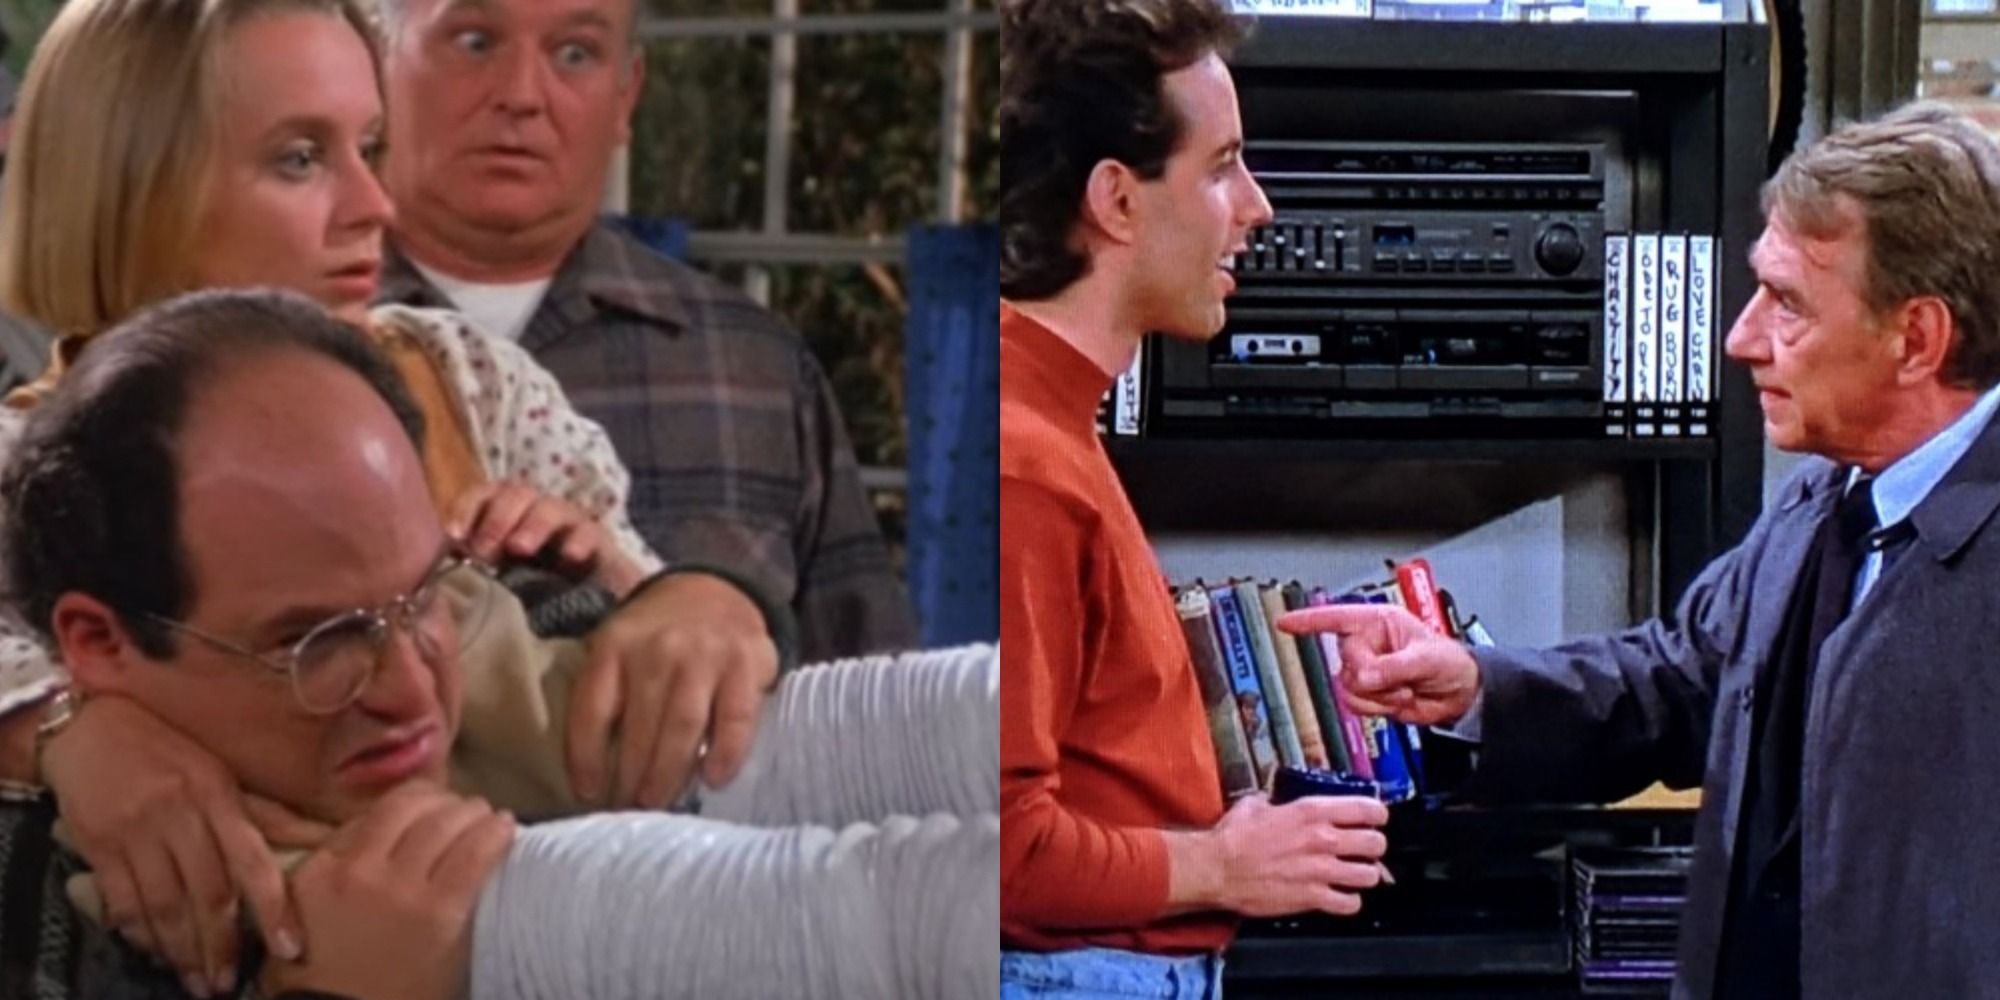 Split image of Seinfeld's the bubble boy and mr. bookman